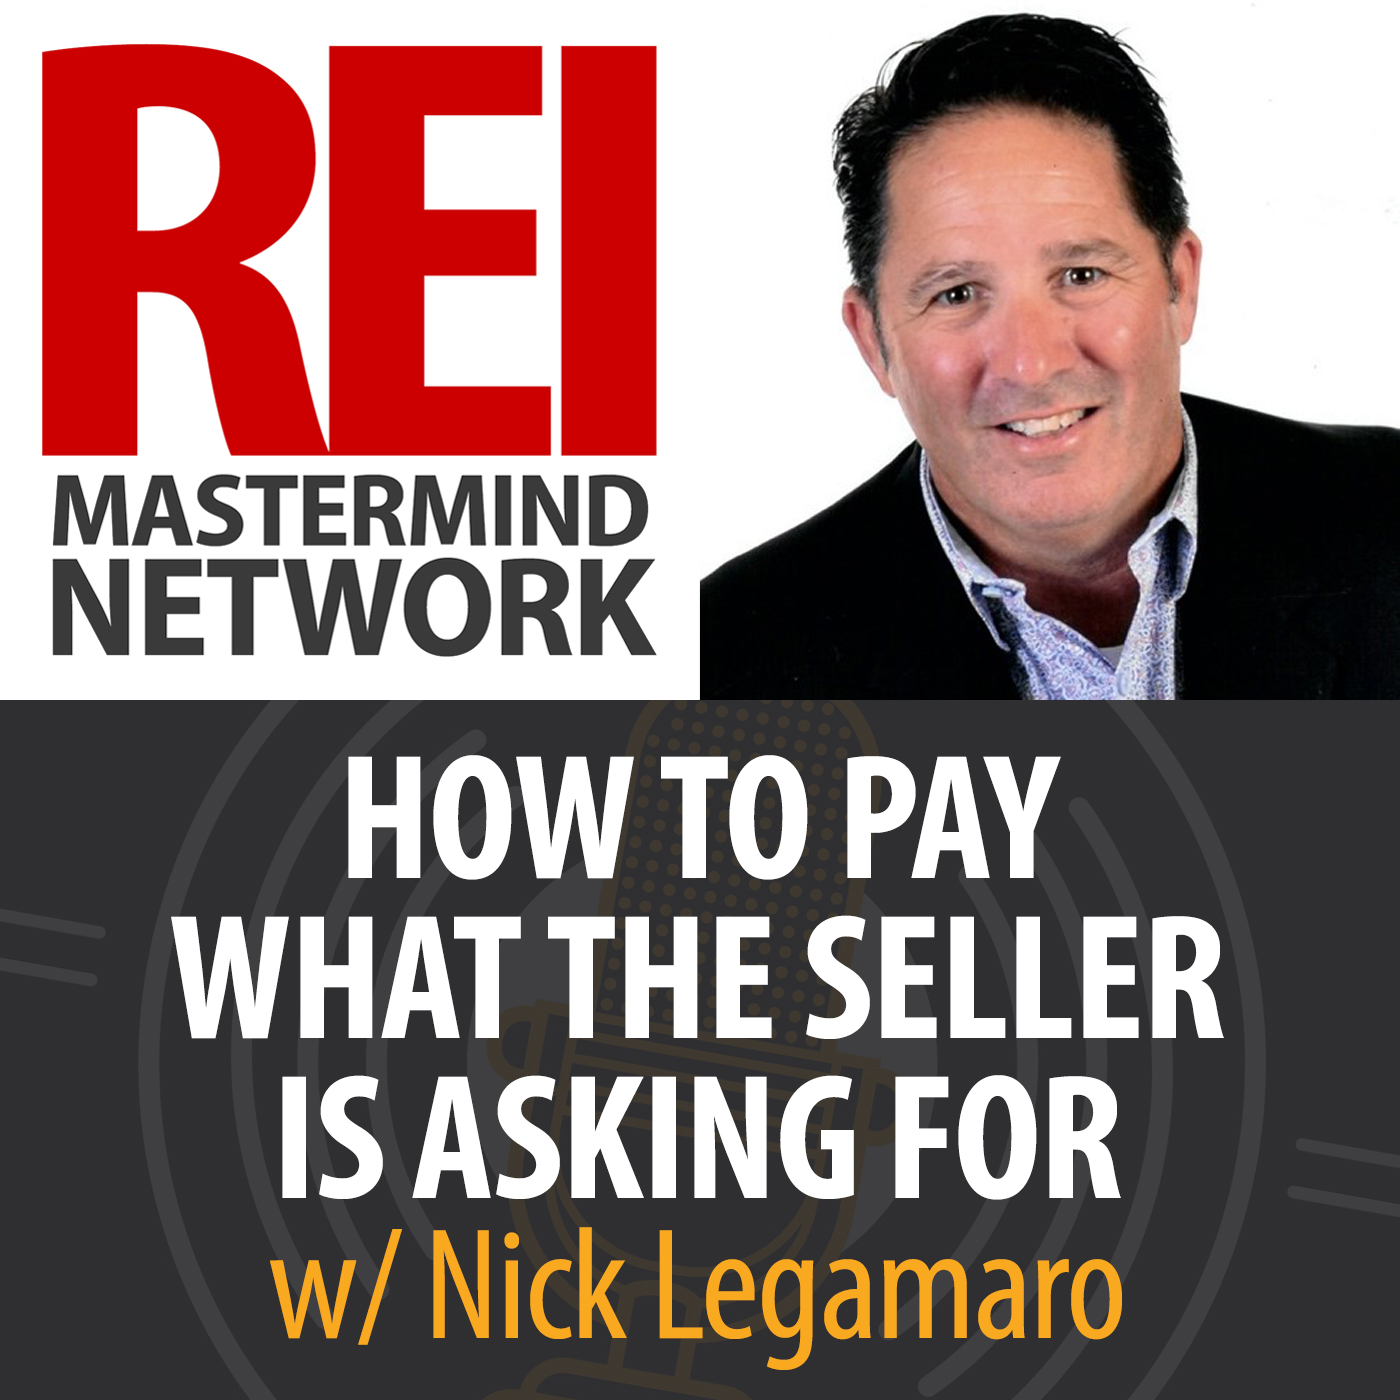 How To Pay What the Seller Is Asking for with Nick Legamaro Image